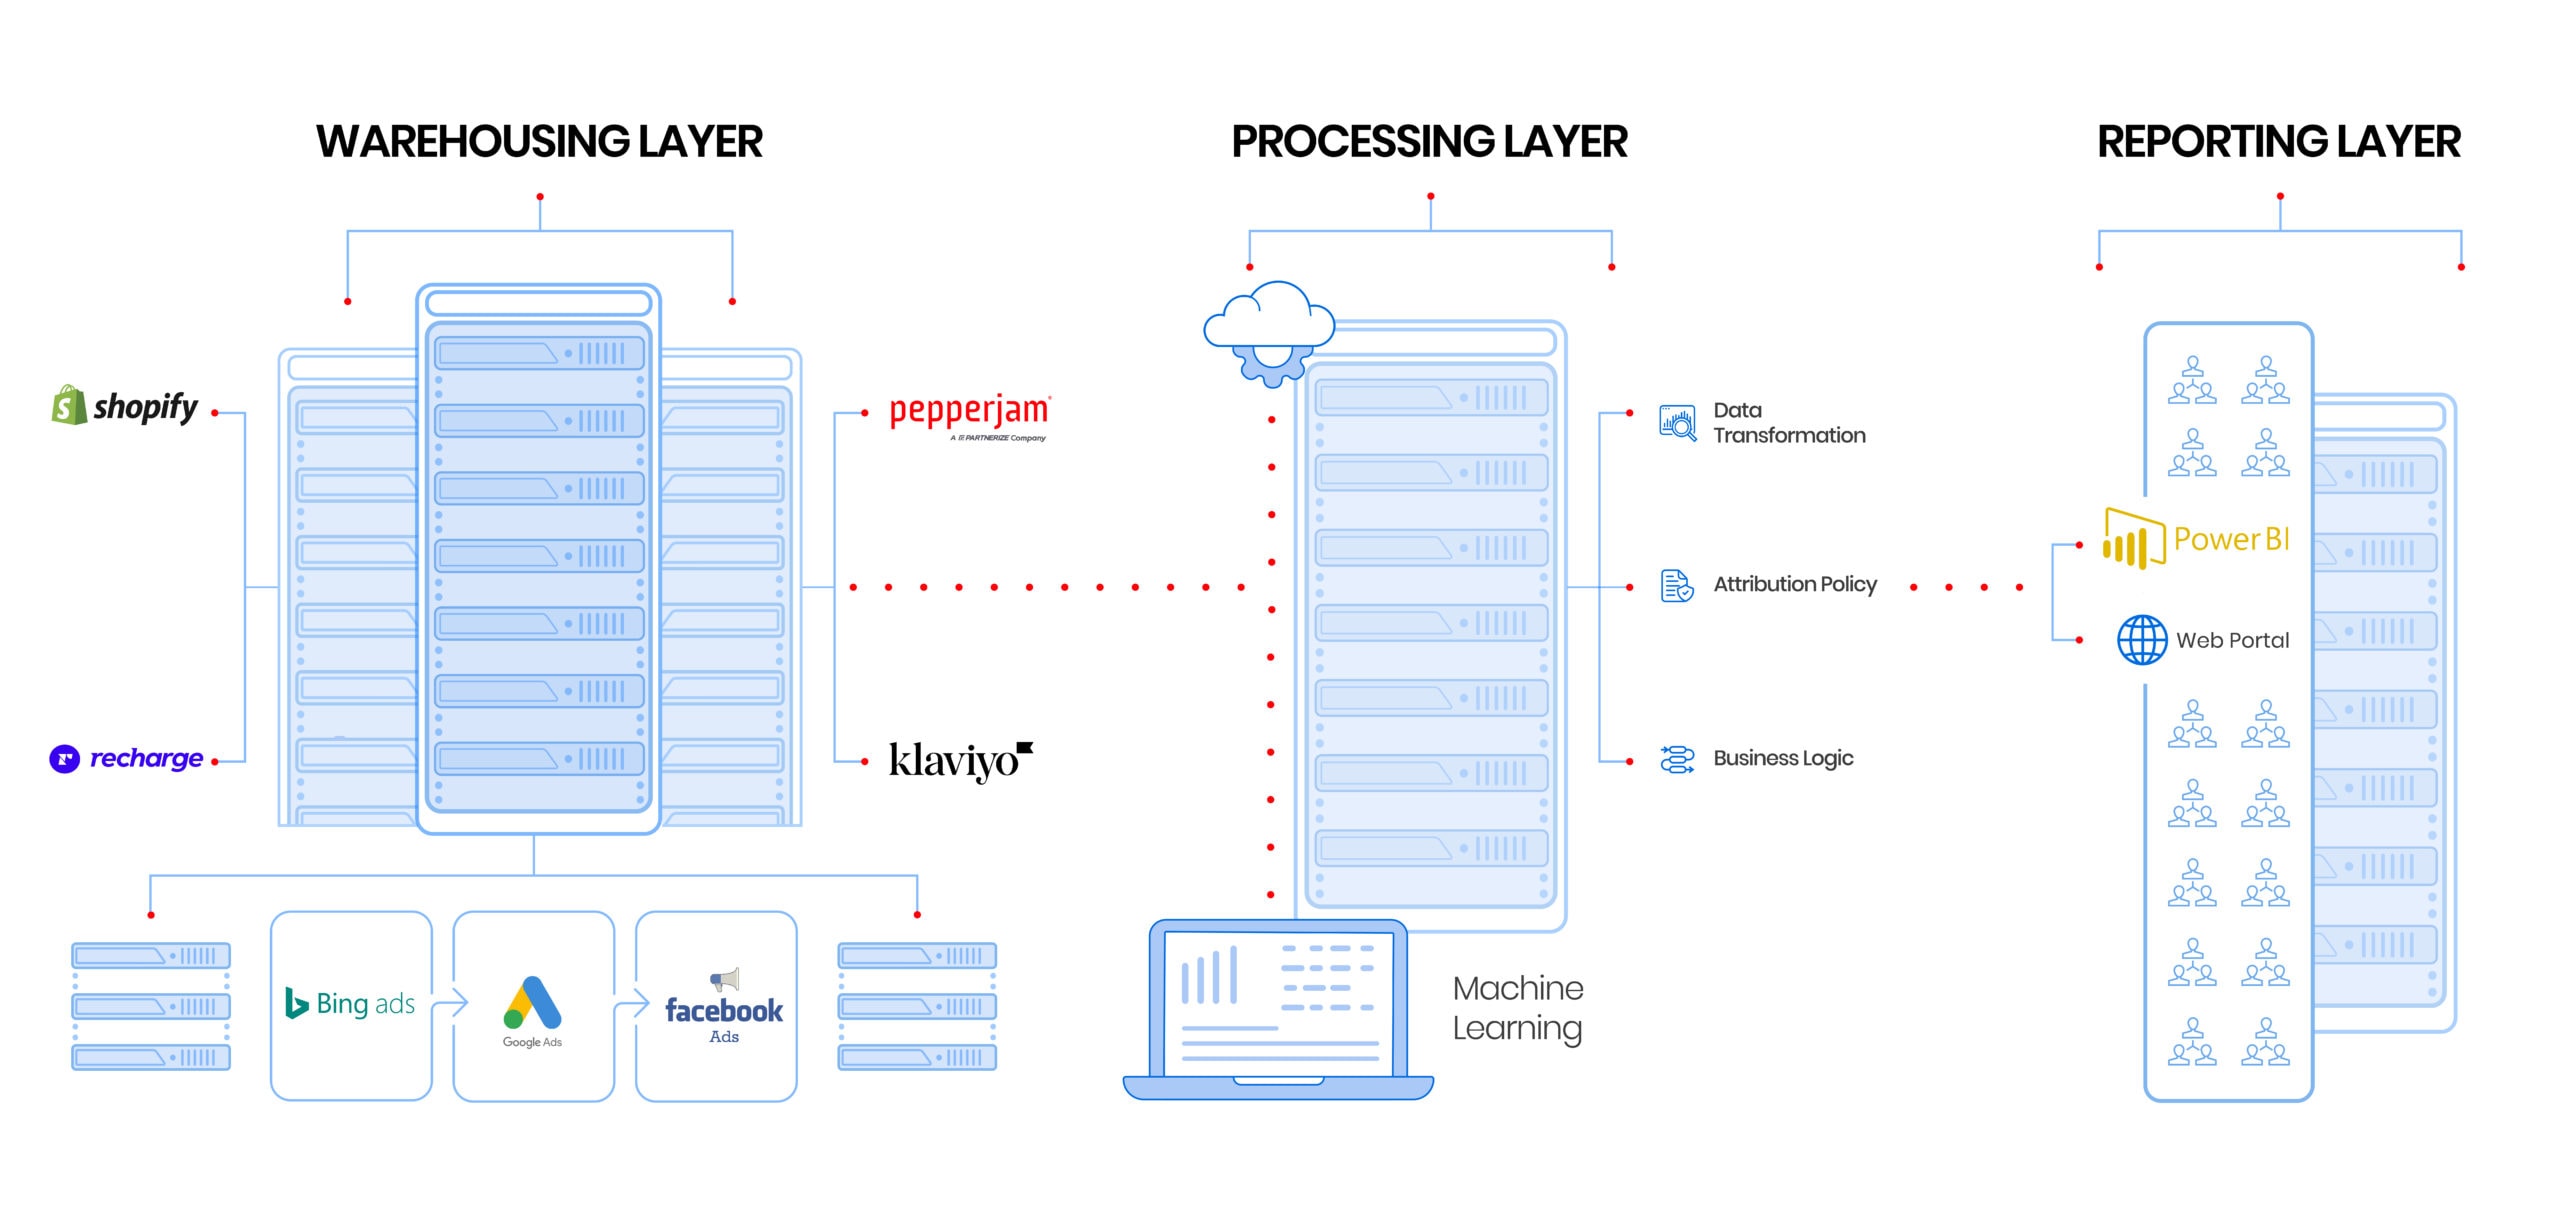 A flow diagram that illustrates the data warehousing, processing, and reporting layers 